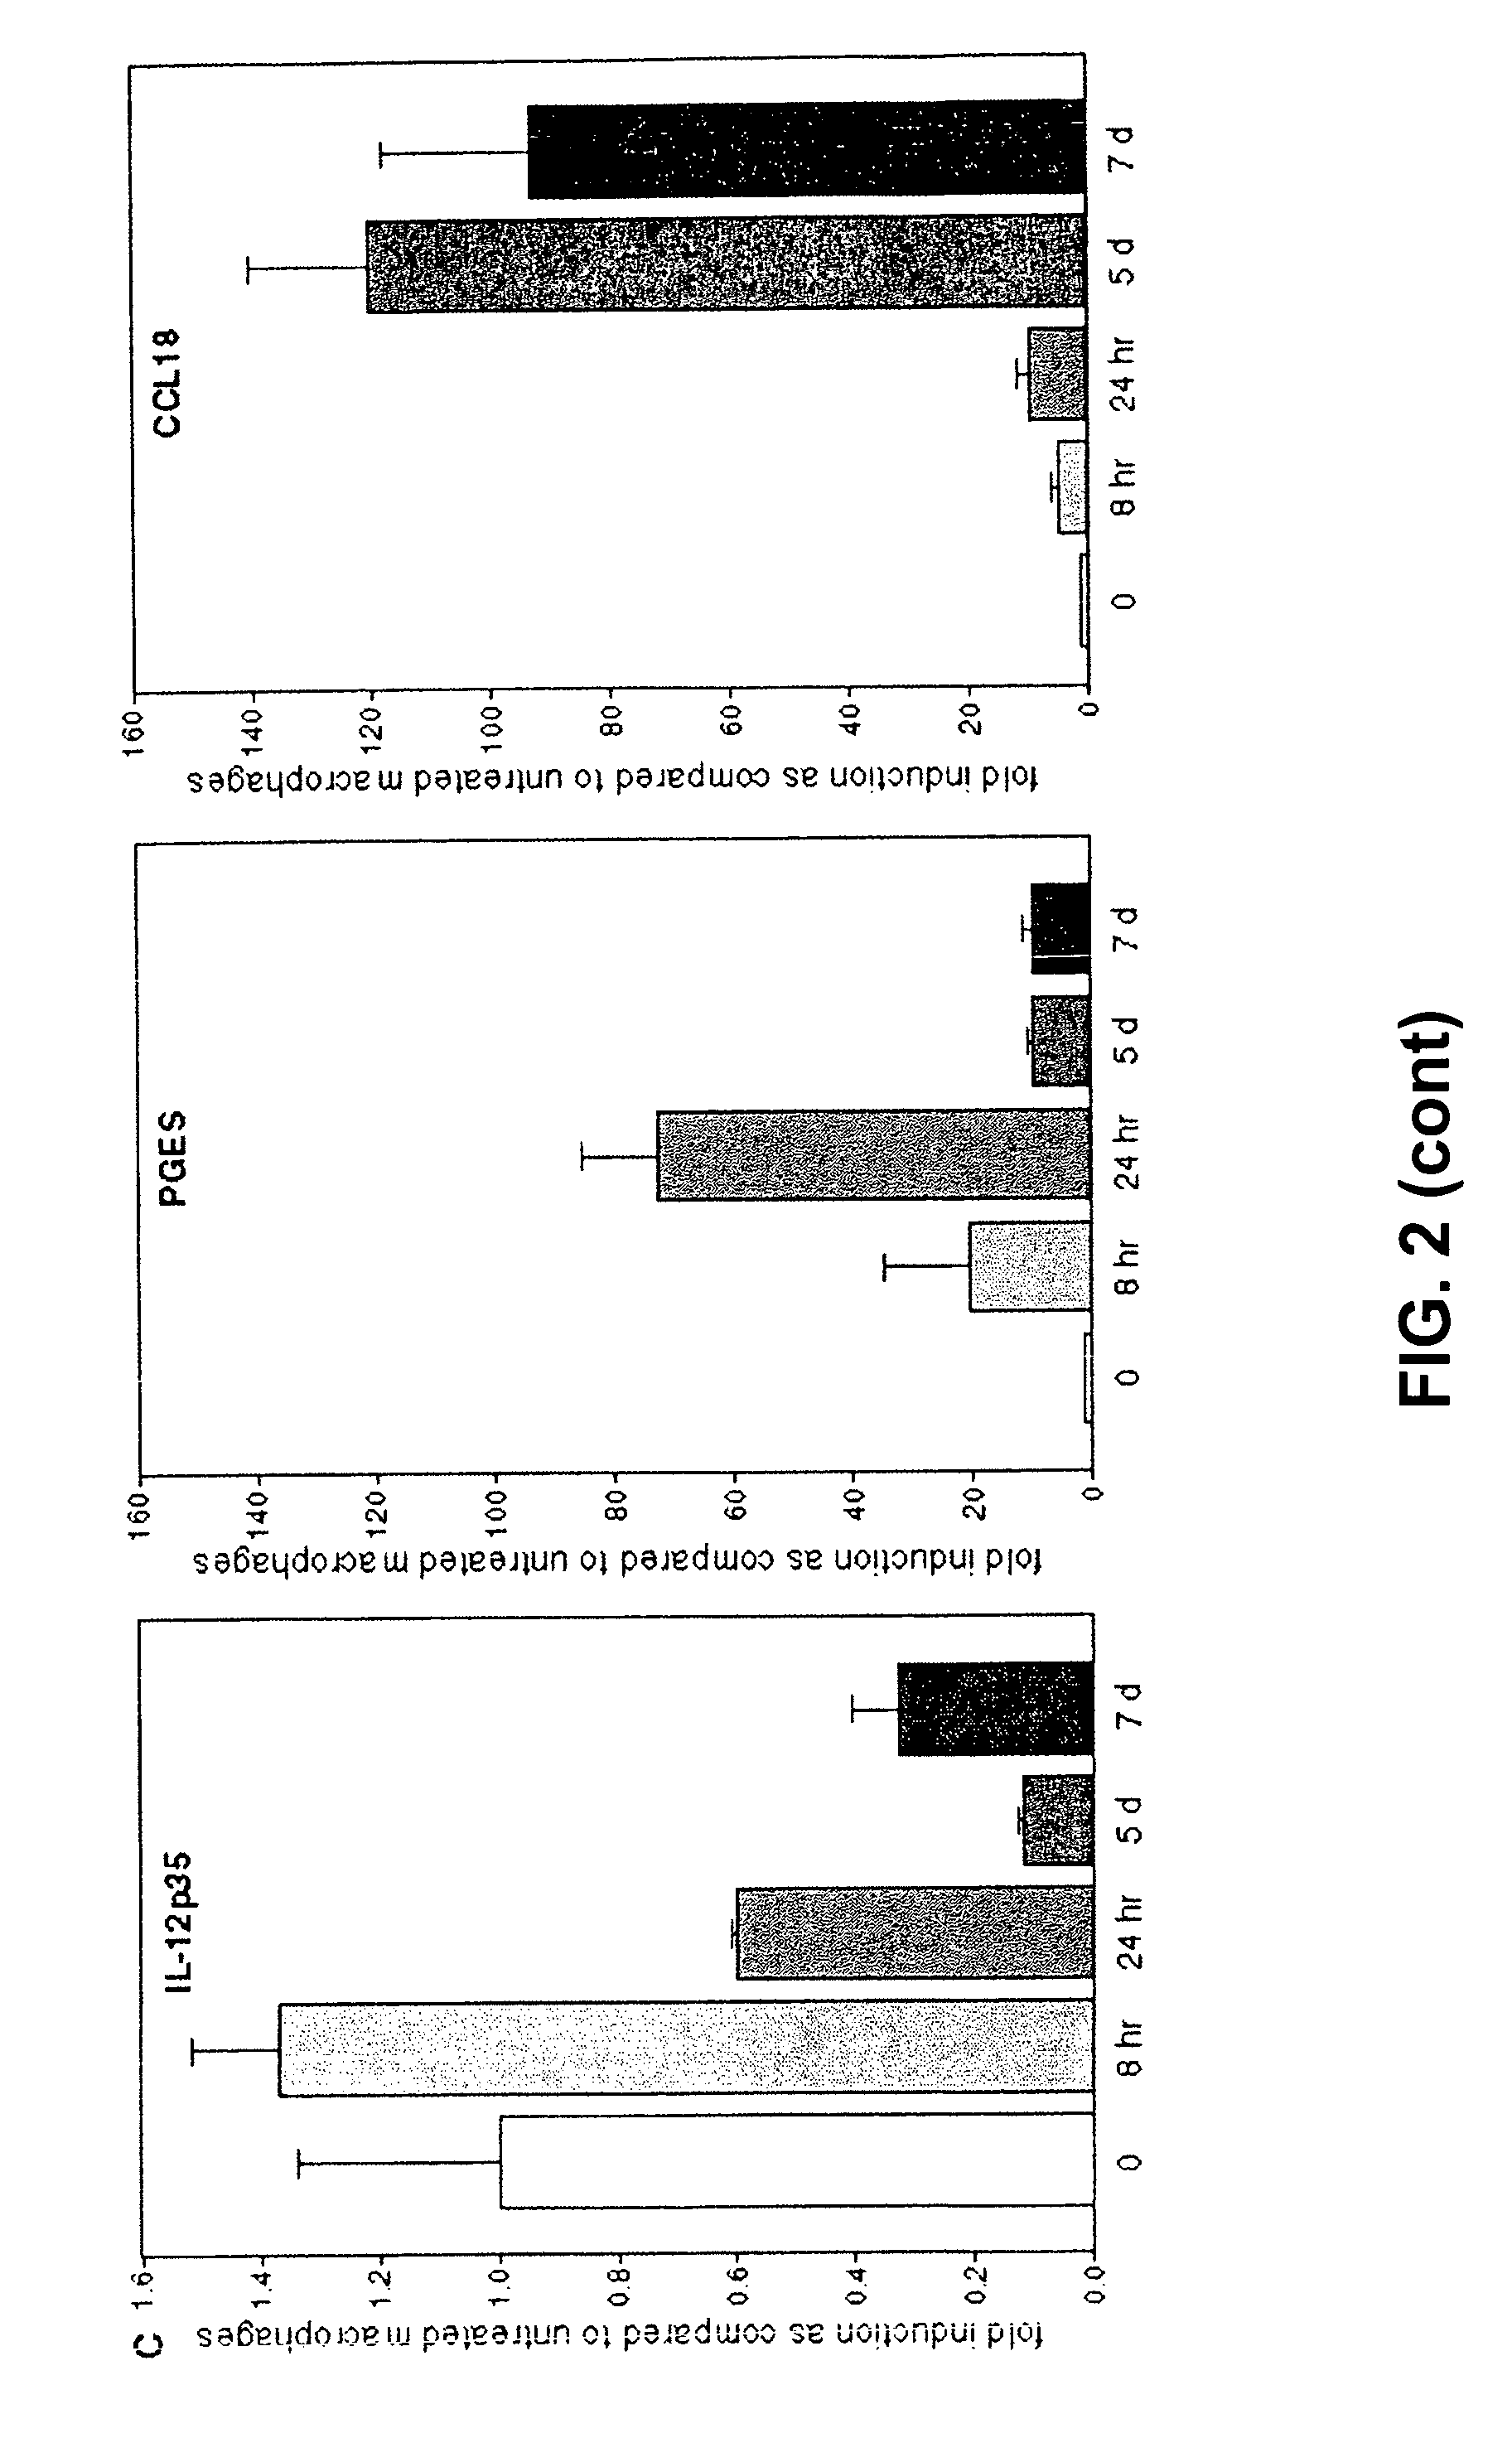 Method for in vitro testing of compounds for assessing therapeutic value in the treatment of multiple sclerosis and other diseases wherein foamy cells are involved in the disease etiology